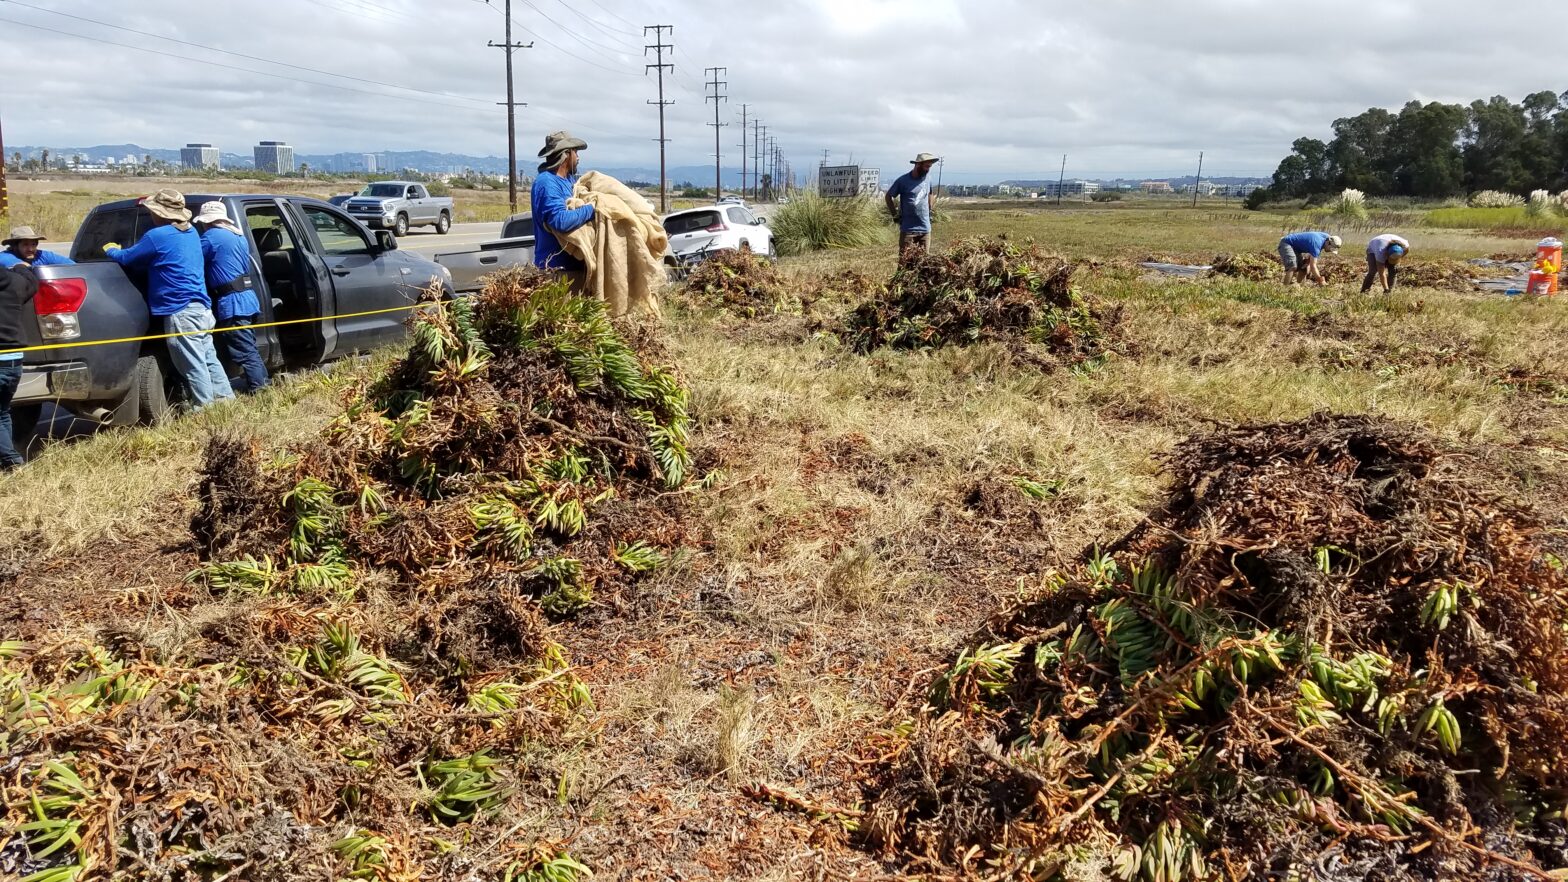 Mounds of iceplant being removed from Ballona south of Culver Blvd (13 Sept 2016)